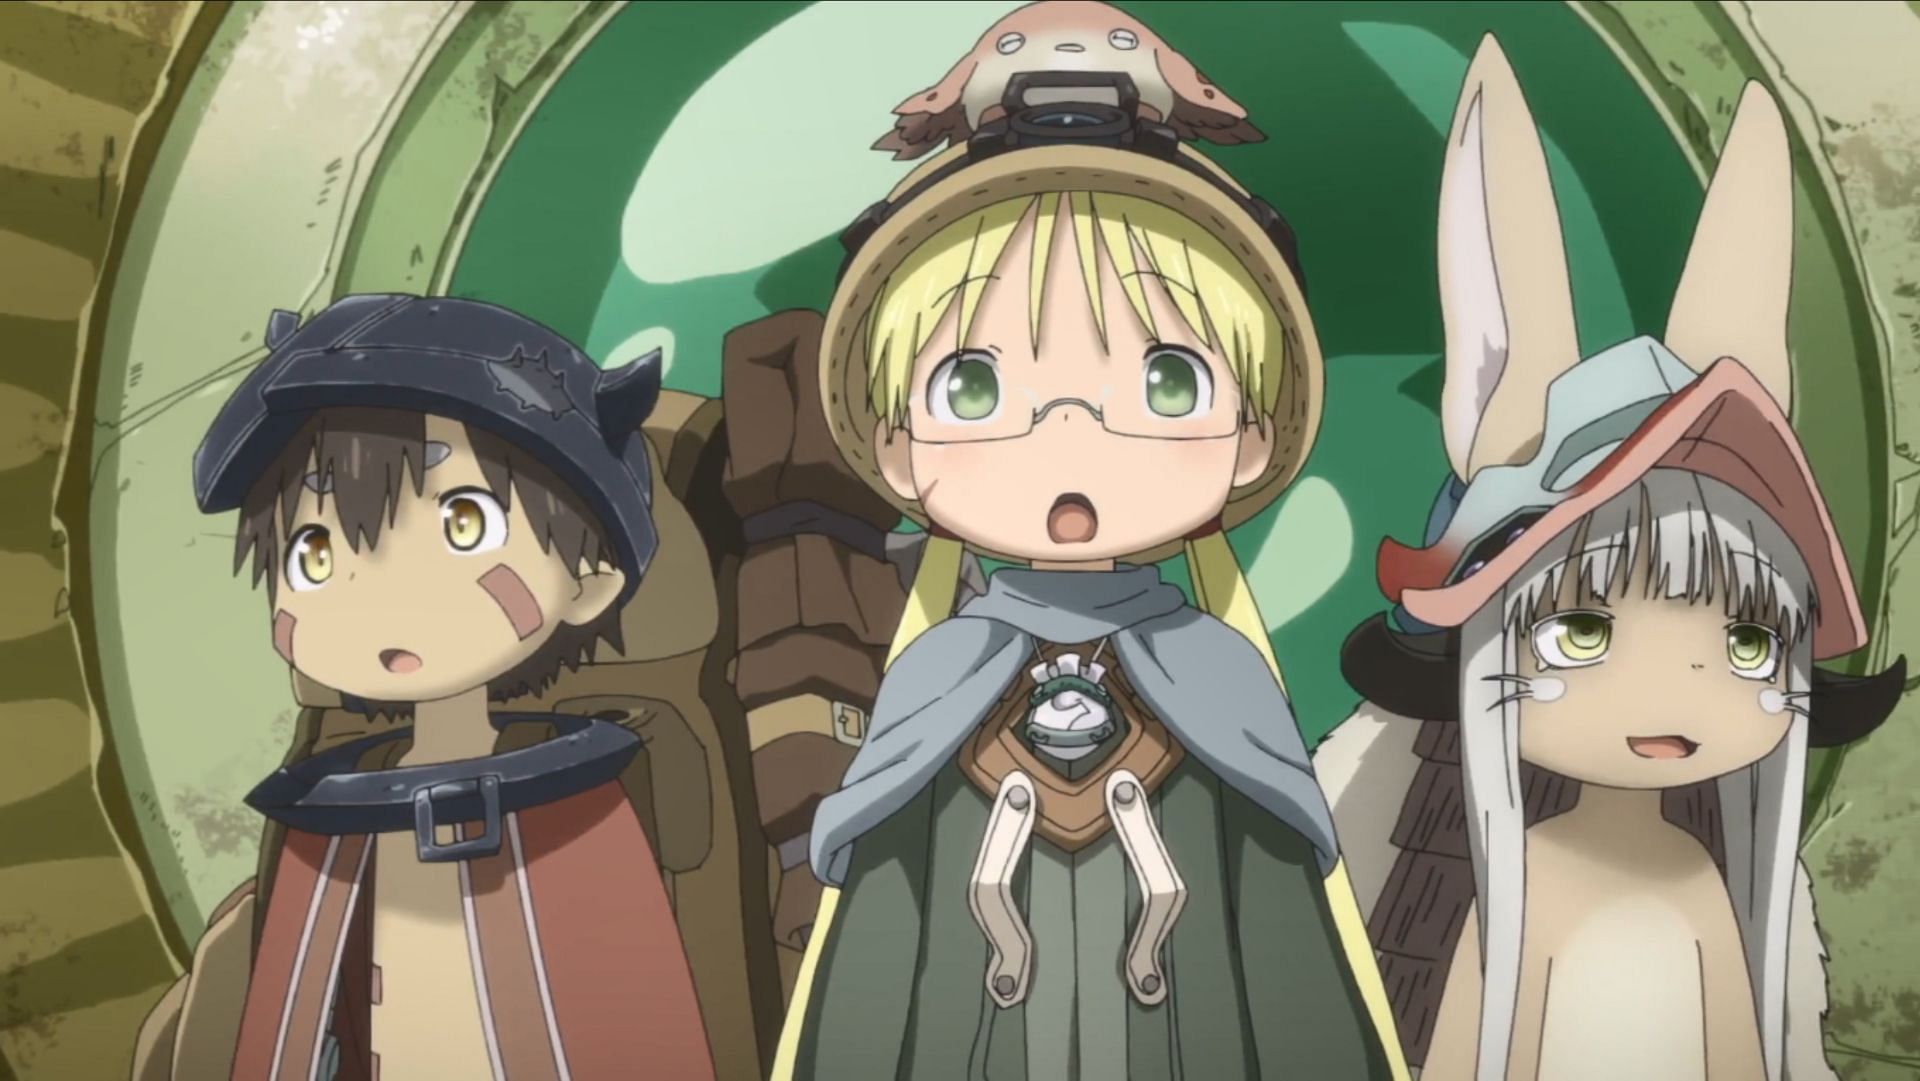 Made in Abyss Season 2 Episode 2 release date, what to expect, & more